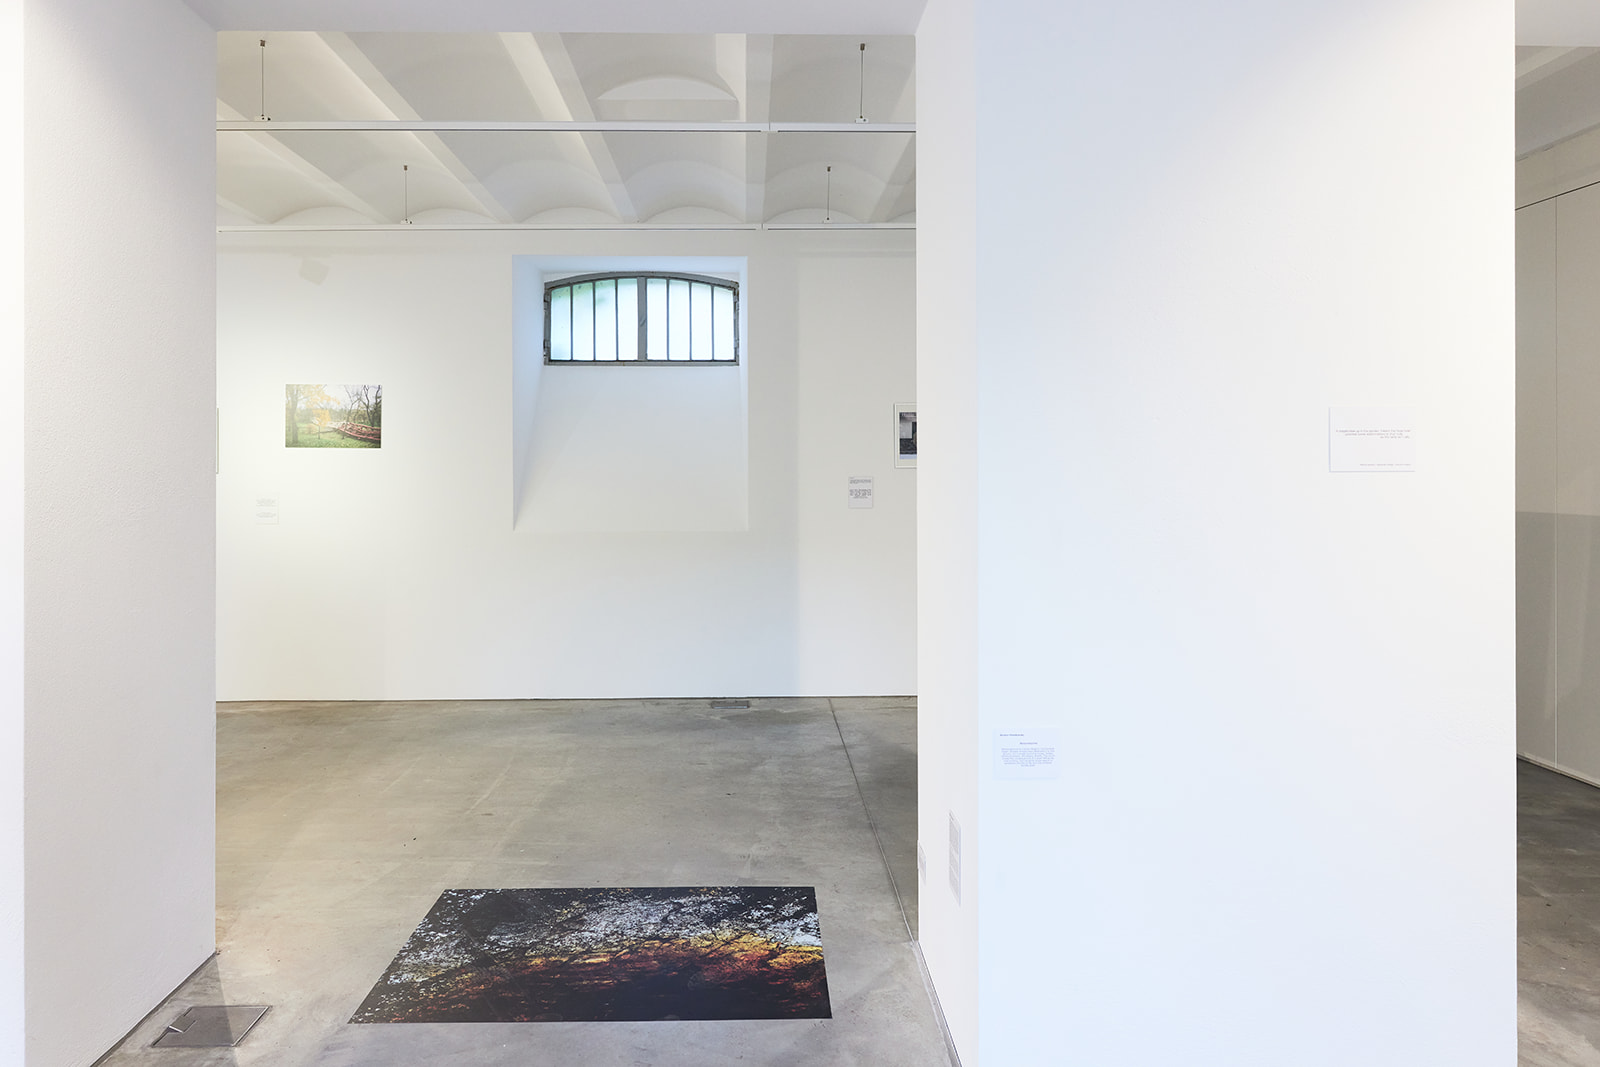 Pictures on the walls and on the floor of the gallery